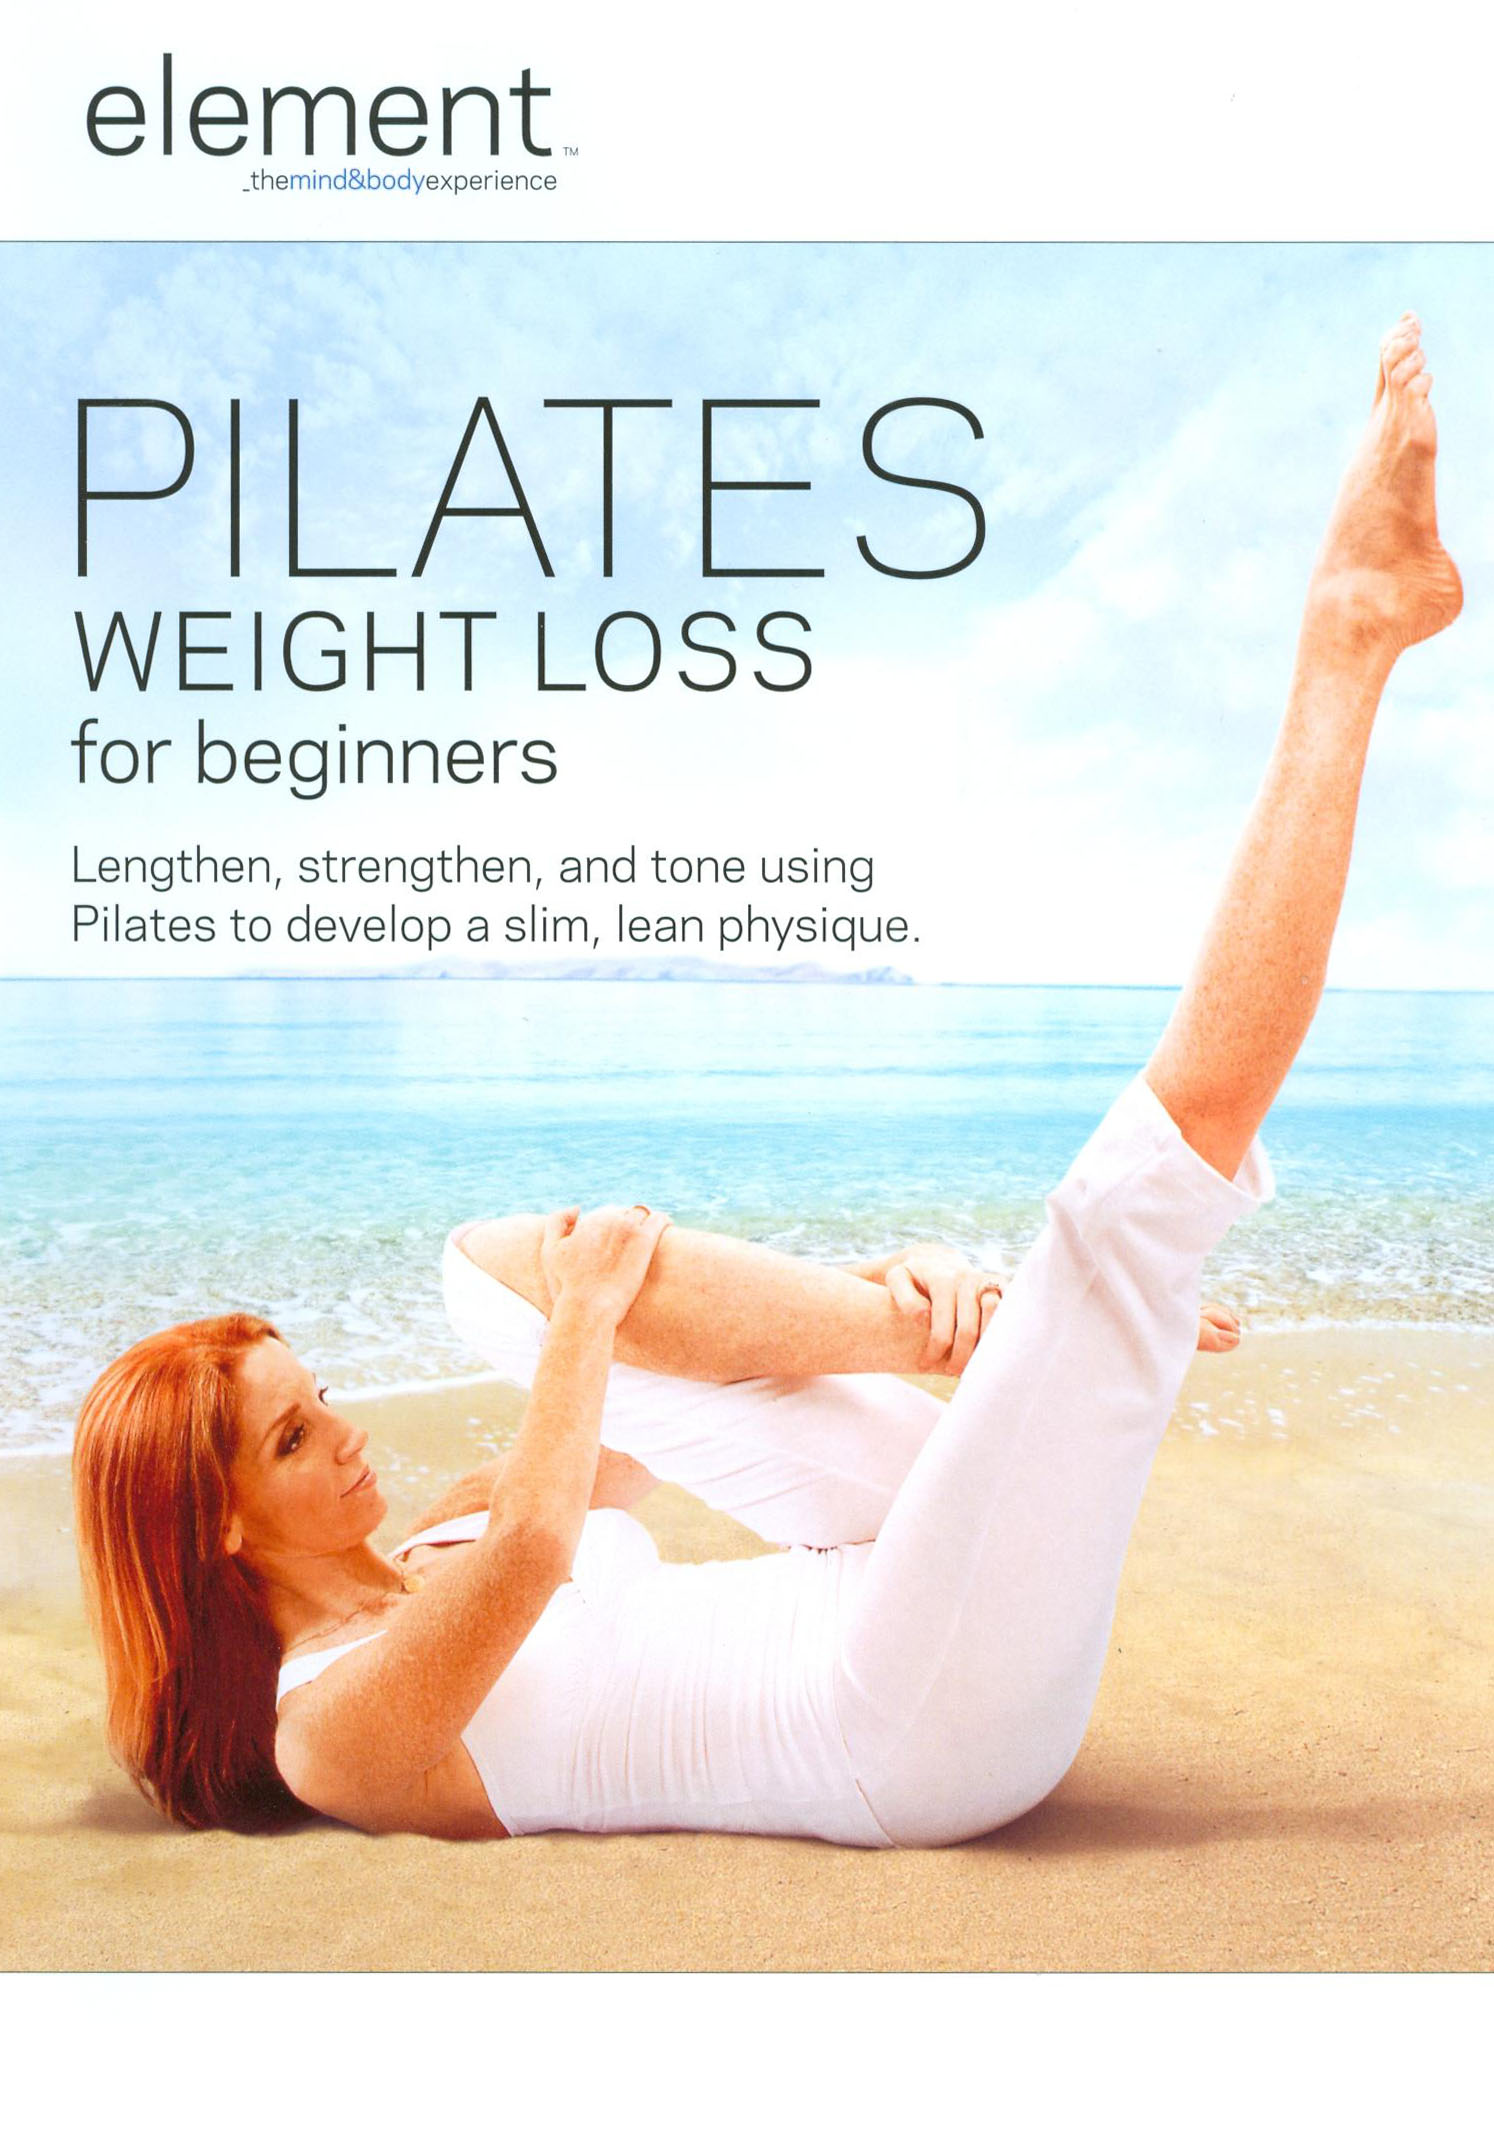 Element: Pilates Weight Loss for Beginners - Best Buy